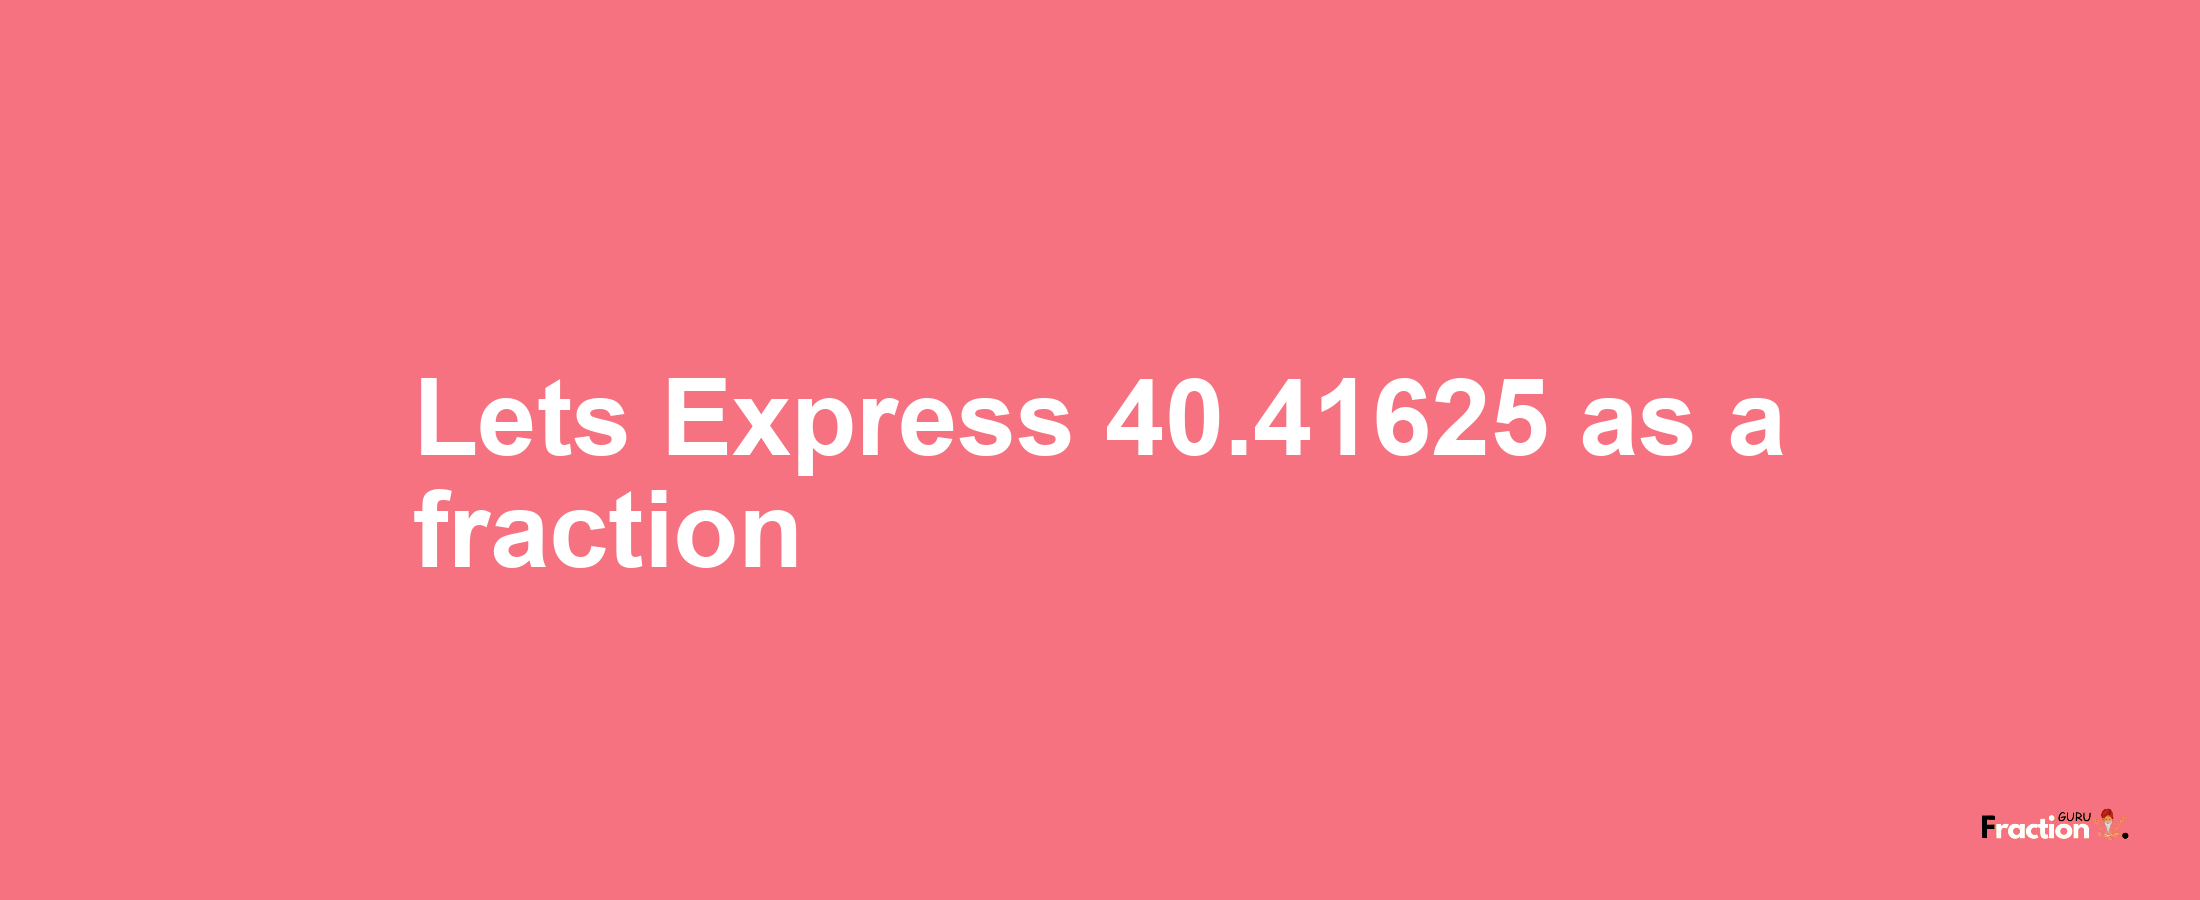 Lets Express 40.41625 as afraction